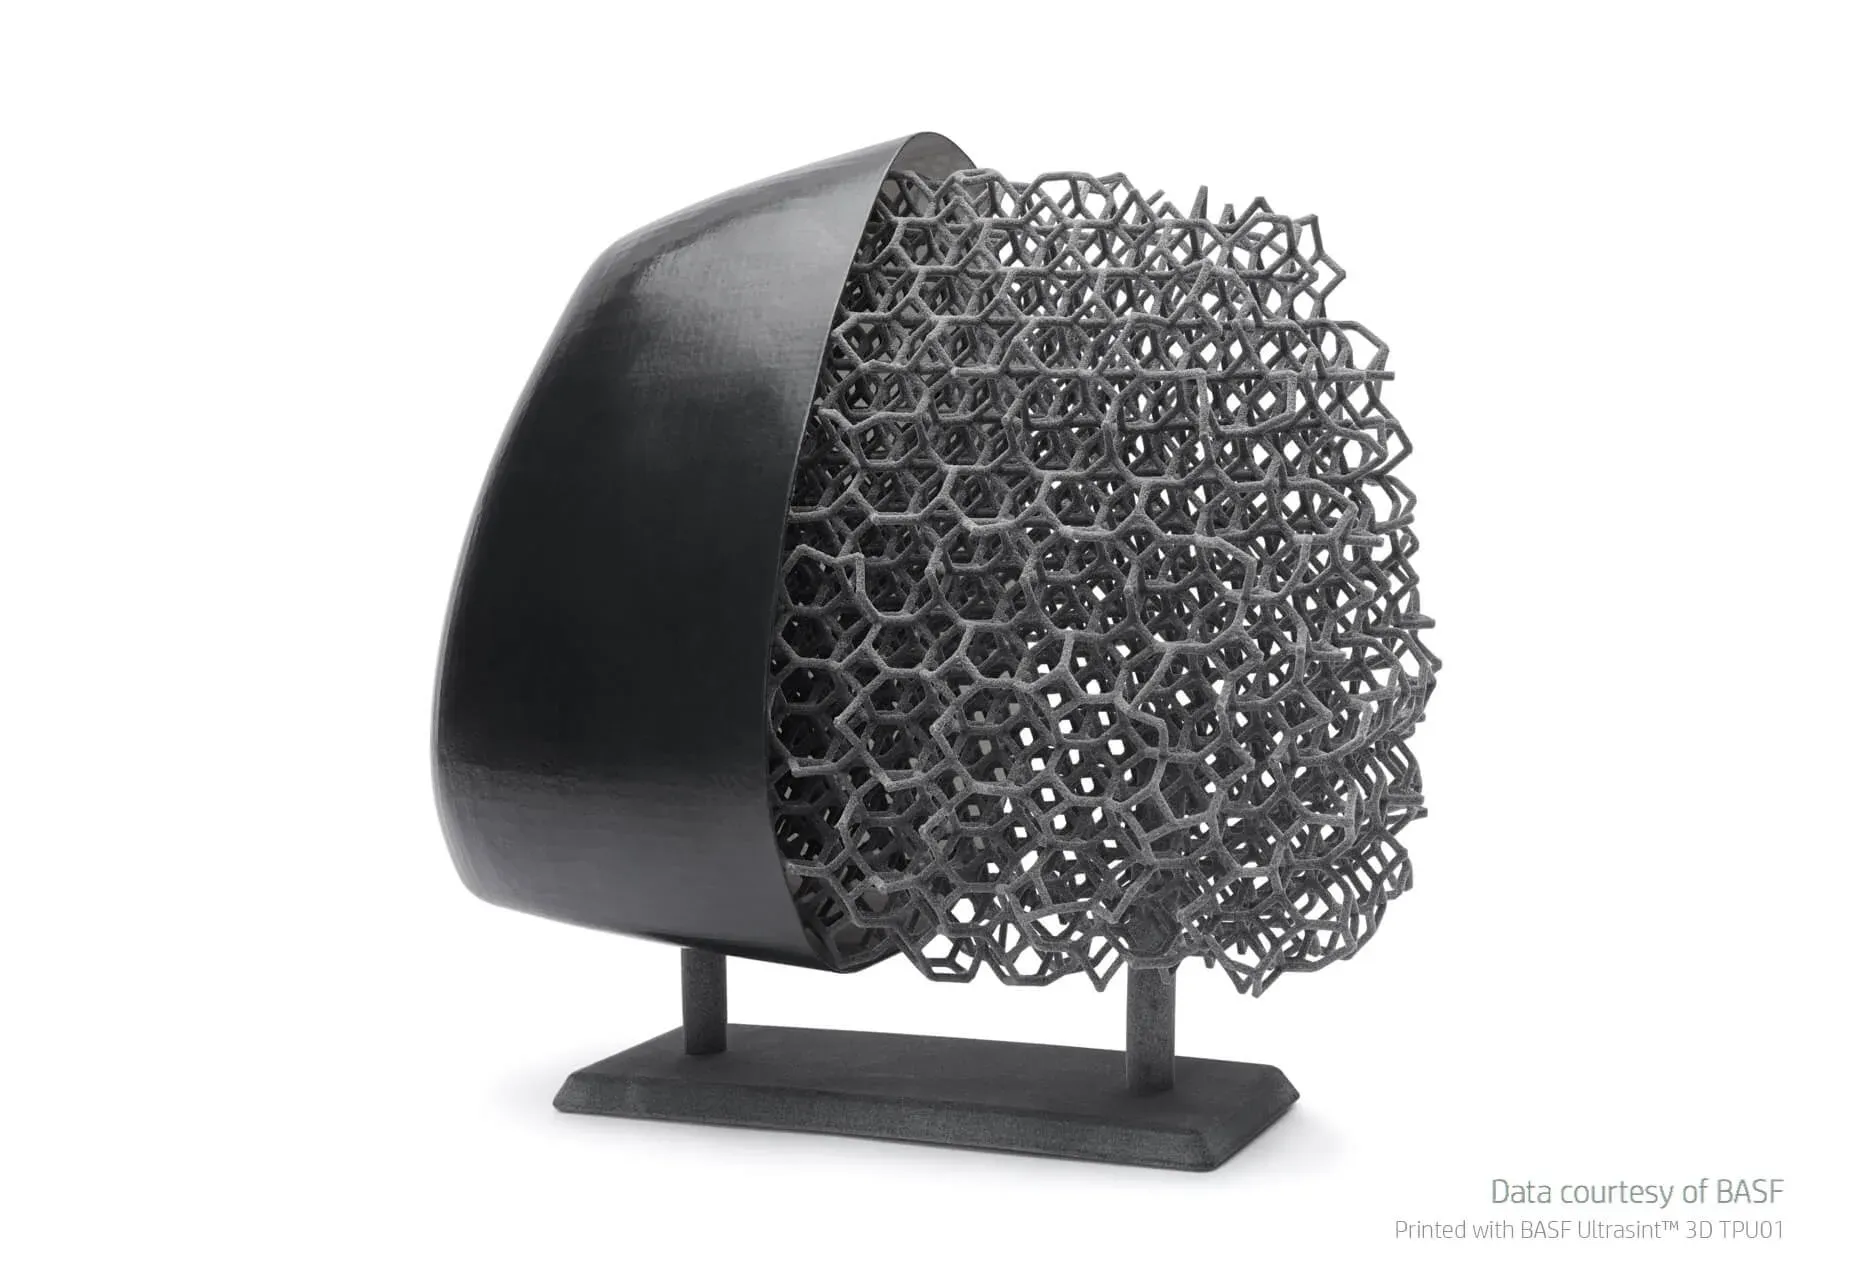 Headrest with grid structure 3D printed in BASF Ultrasint TPU
